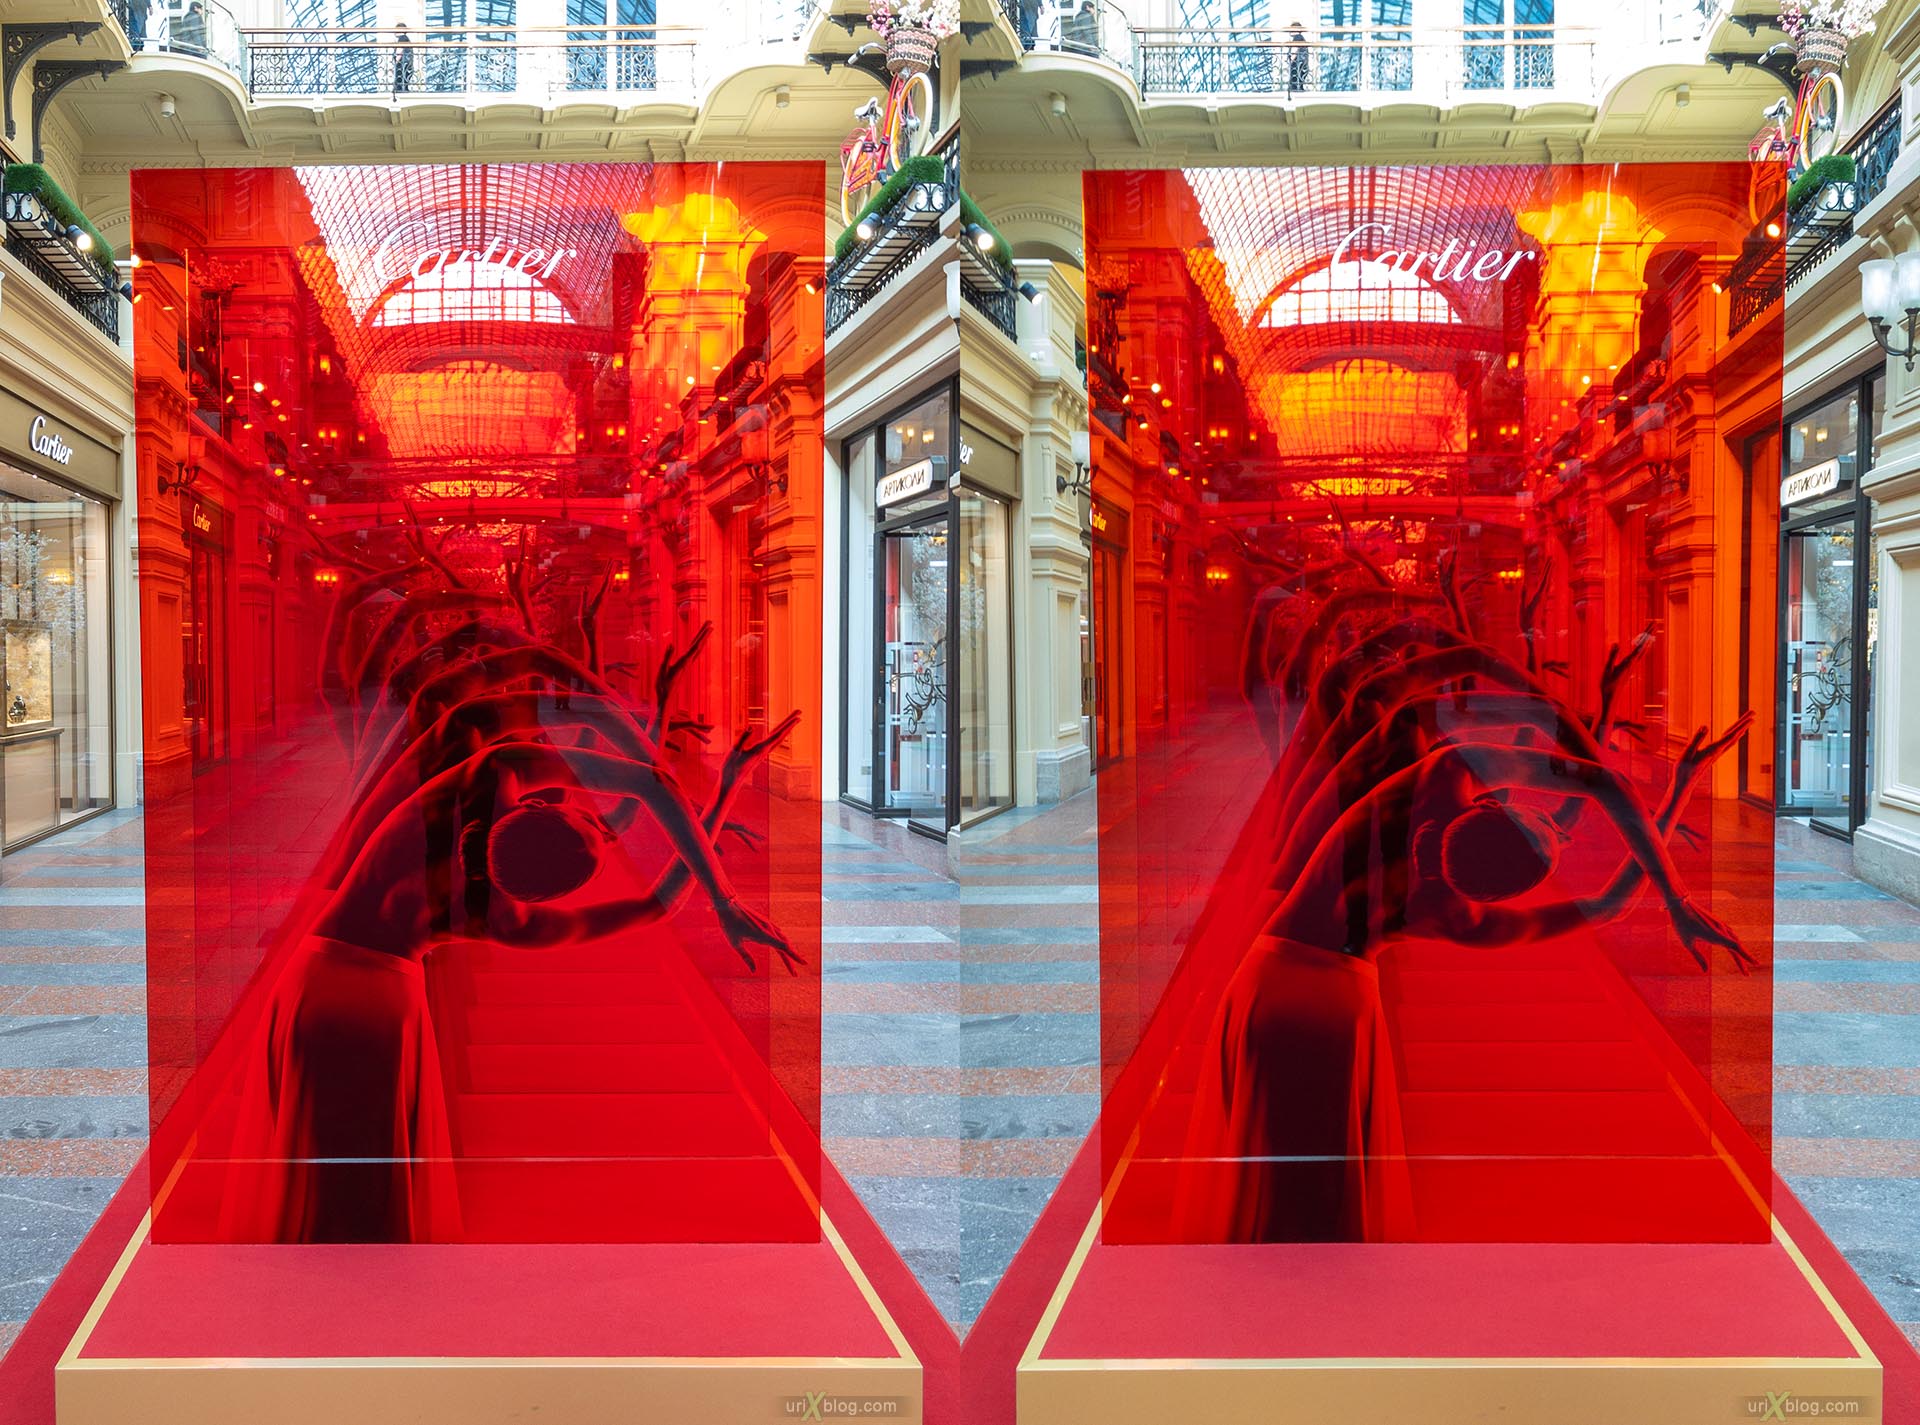 Cartier, GUM store, Moscow, Russia, 3D, stereo pair, cross-eyed, crossview, cross view stereo pair, stereoscopic